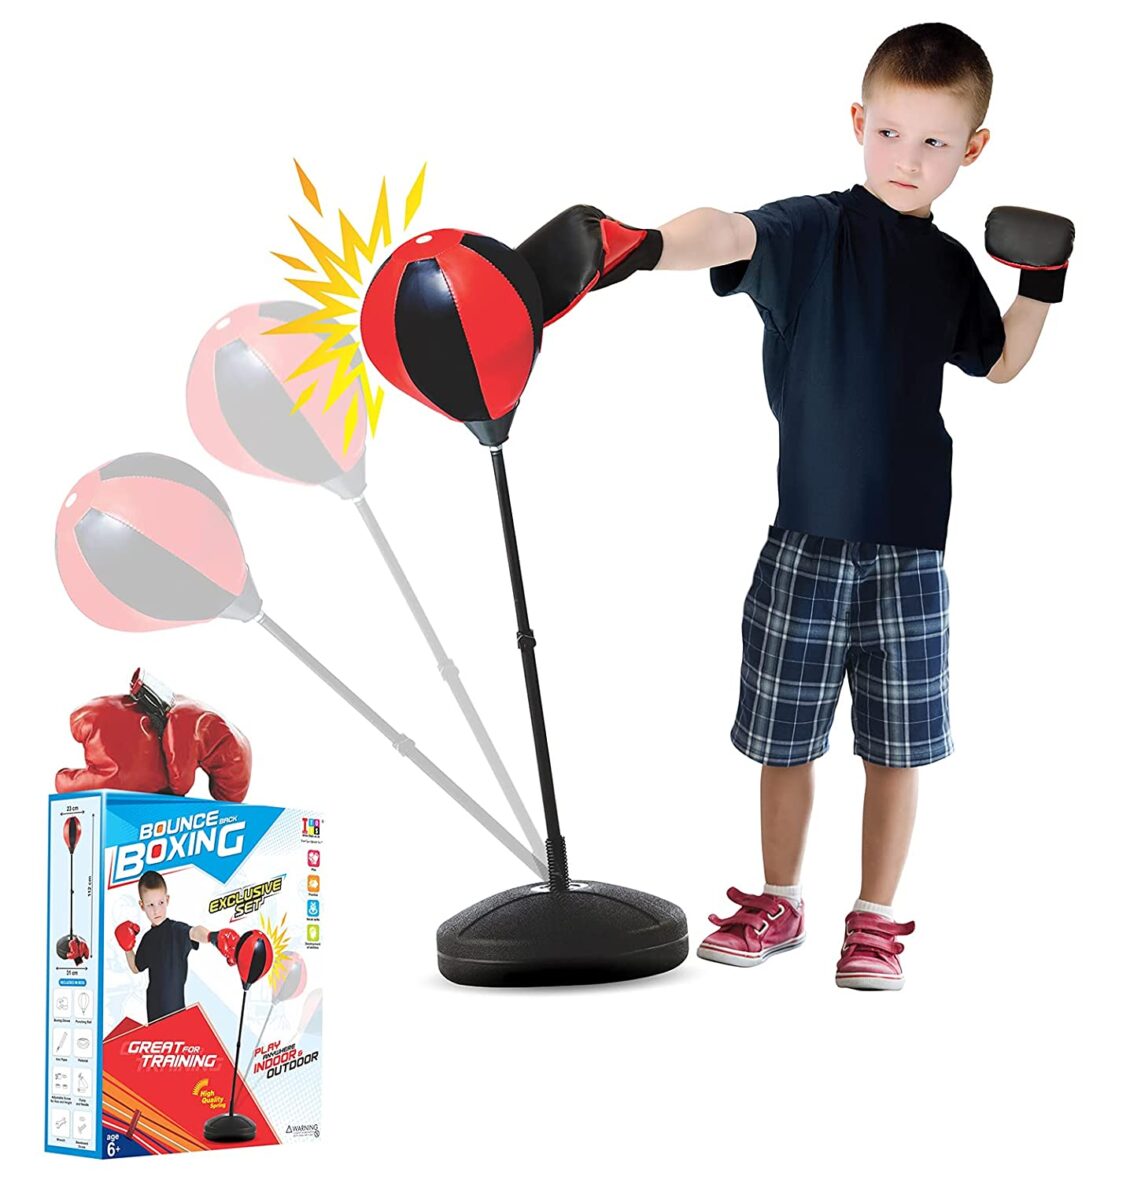 Itoys Bounce Back Boxing Set for Kids/Punching Ball with Adjustable Stand/Includes Padded Boxing Gloves (Multi Color)